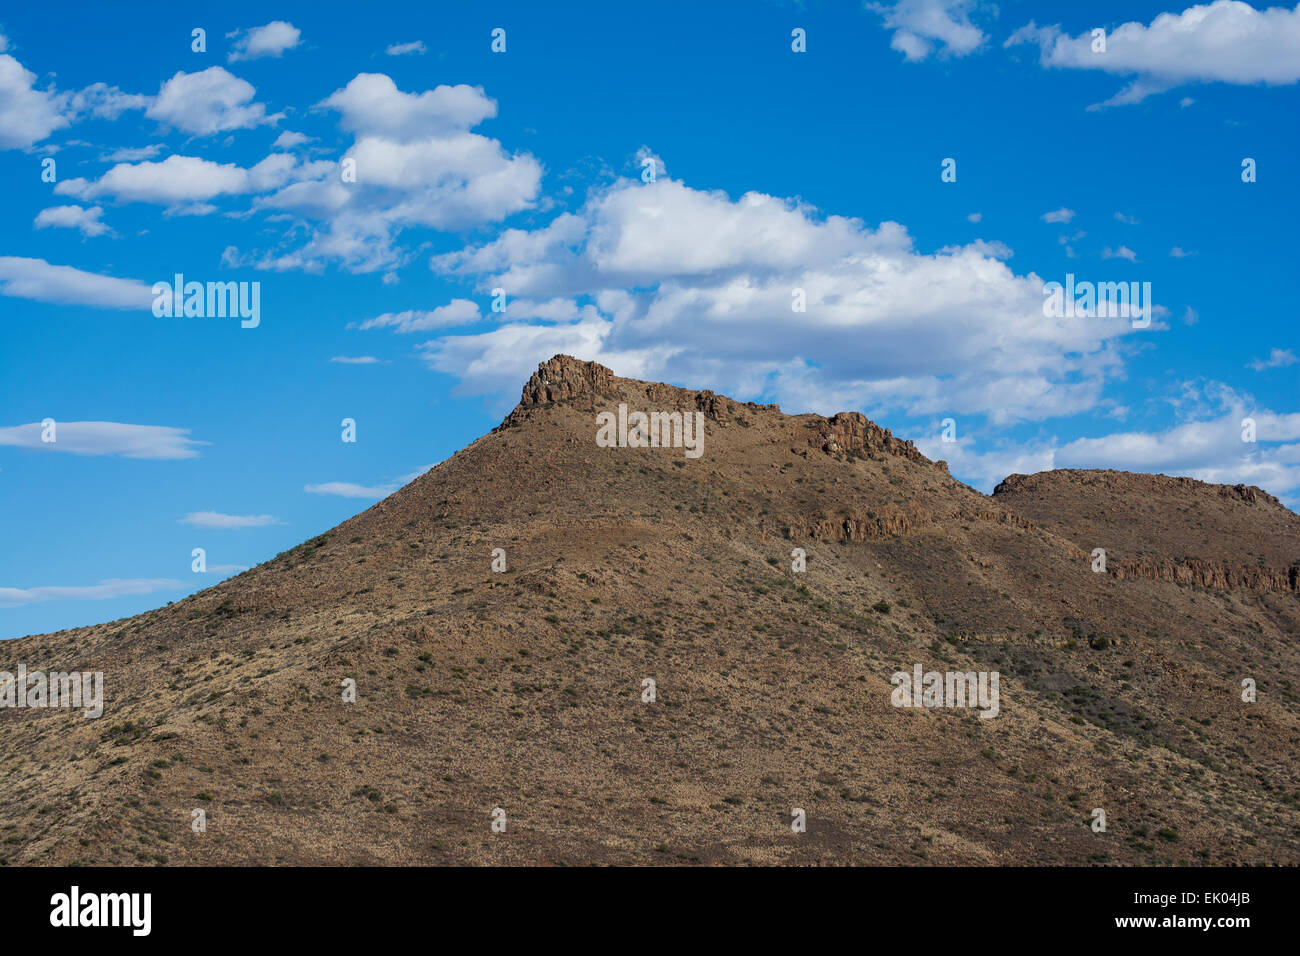 Scenic landscape of a Karoo koppie against a blue, cloudy sky Stock Photo